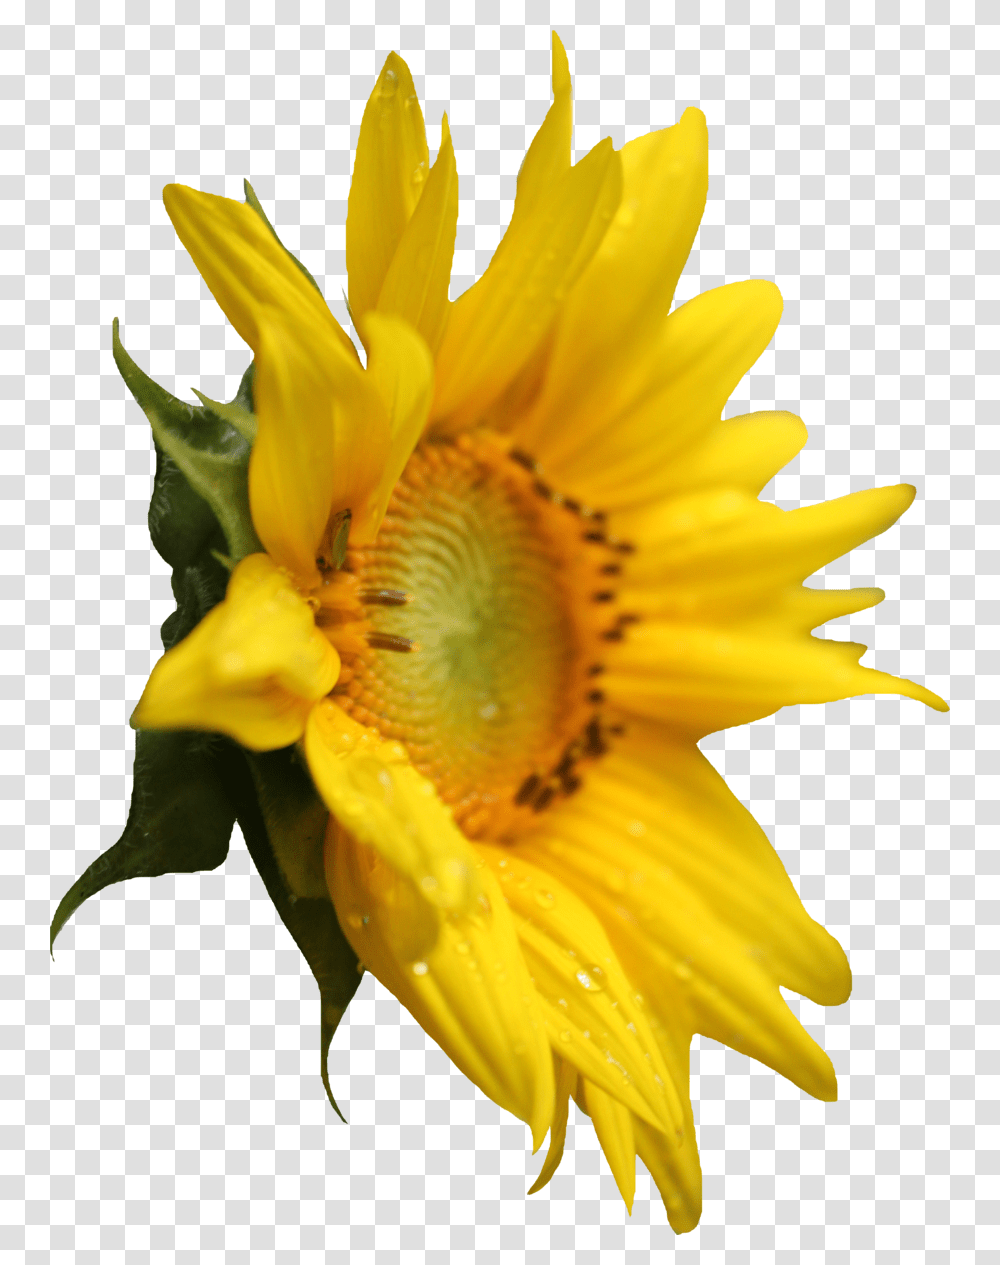 Sunflower Images Sunflower Side View, Plant, Blossom, Daisy, Daisies Transparent Png